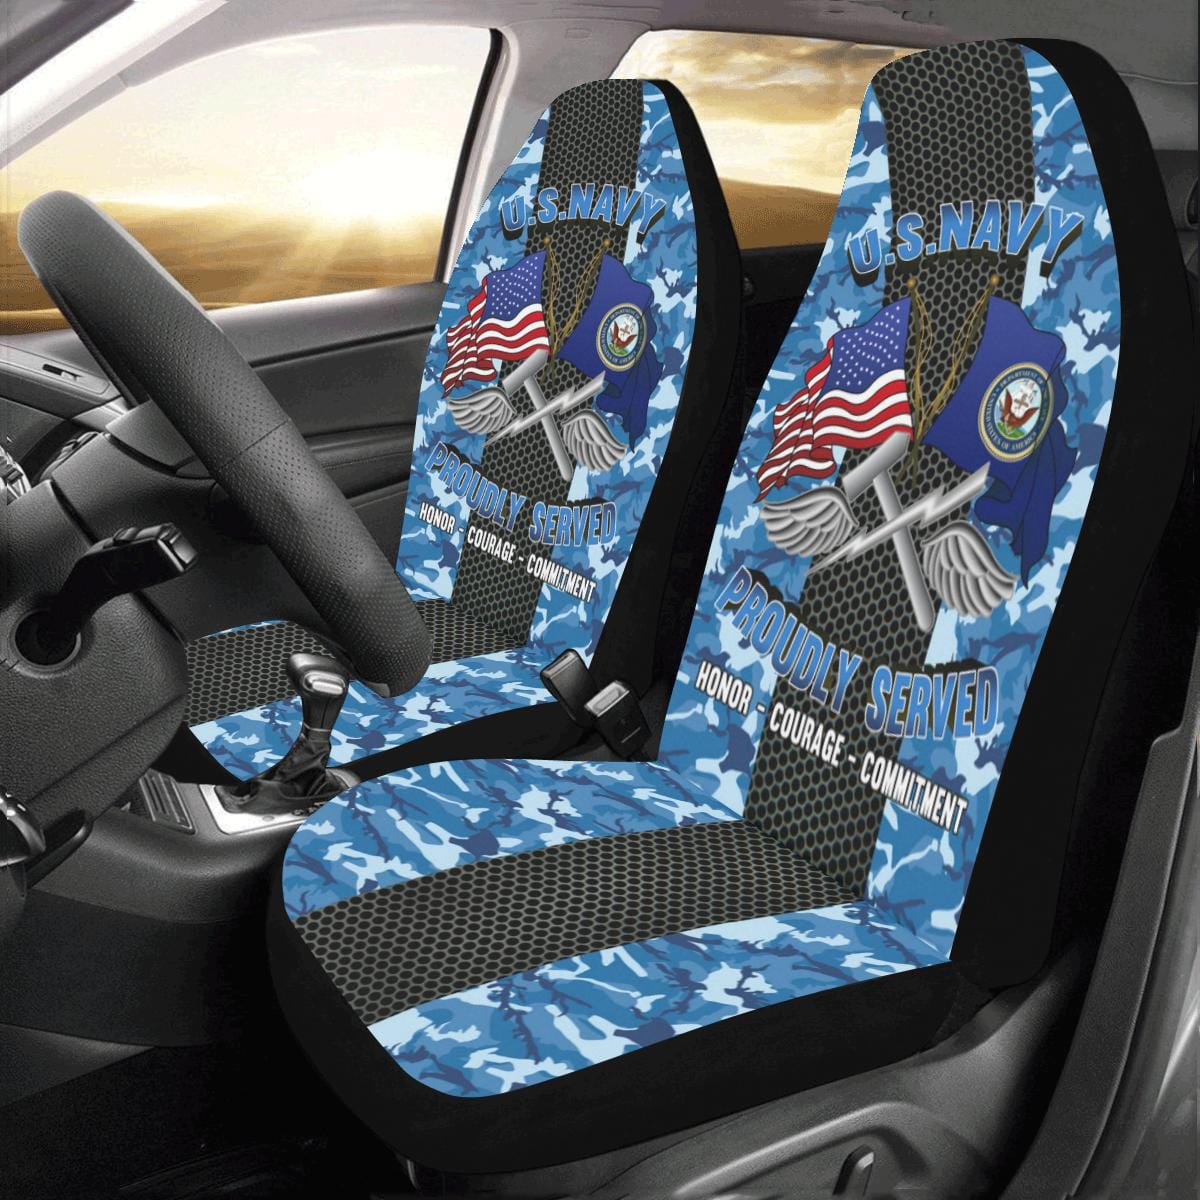 Navy Aviation Support Equipment Tech Navy AS Car Seat Covers (Set of 2)-SeatCovers-Navy-Rate-Veterans Nation